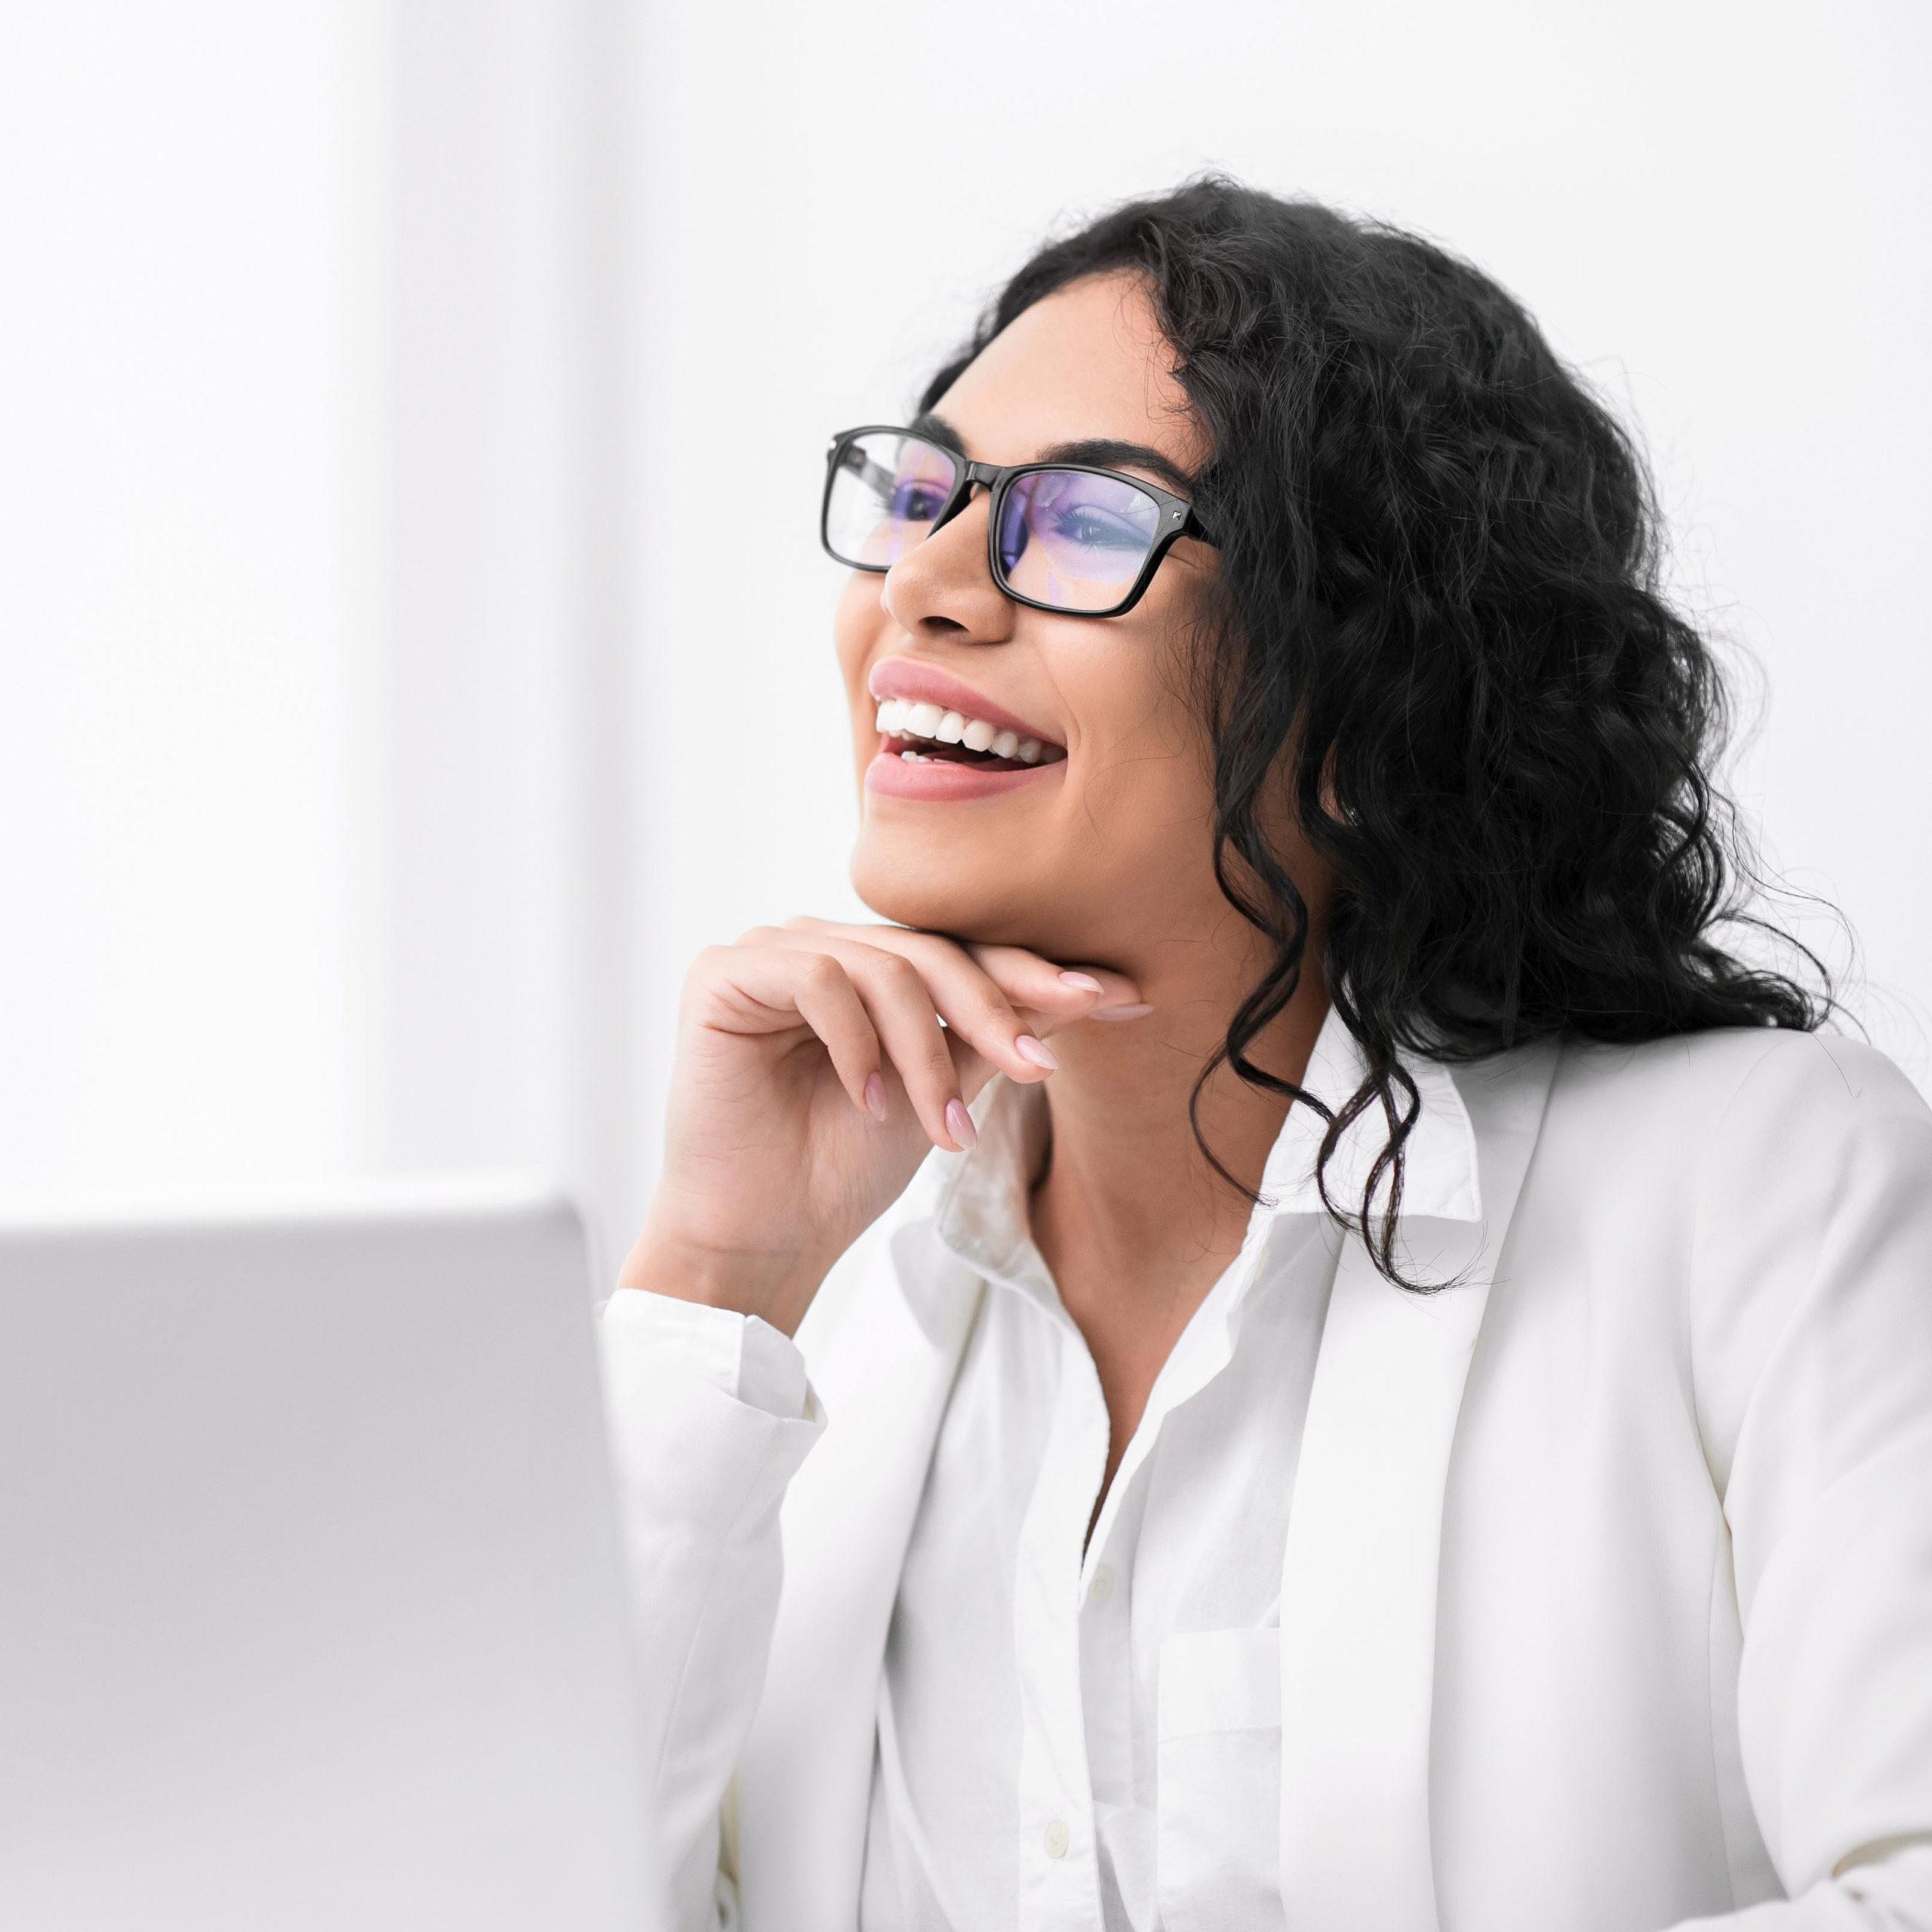 Businesswoman smiling and sitting in front of a laptop